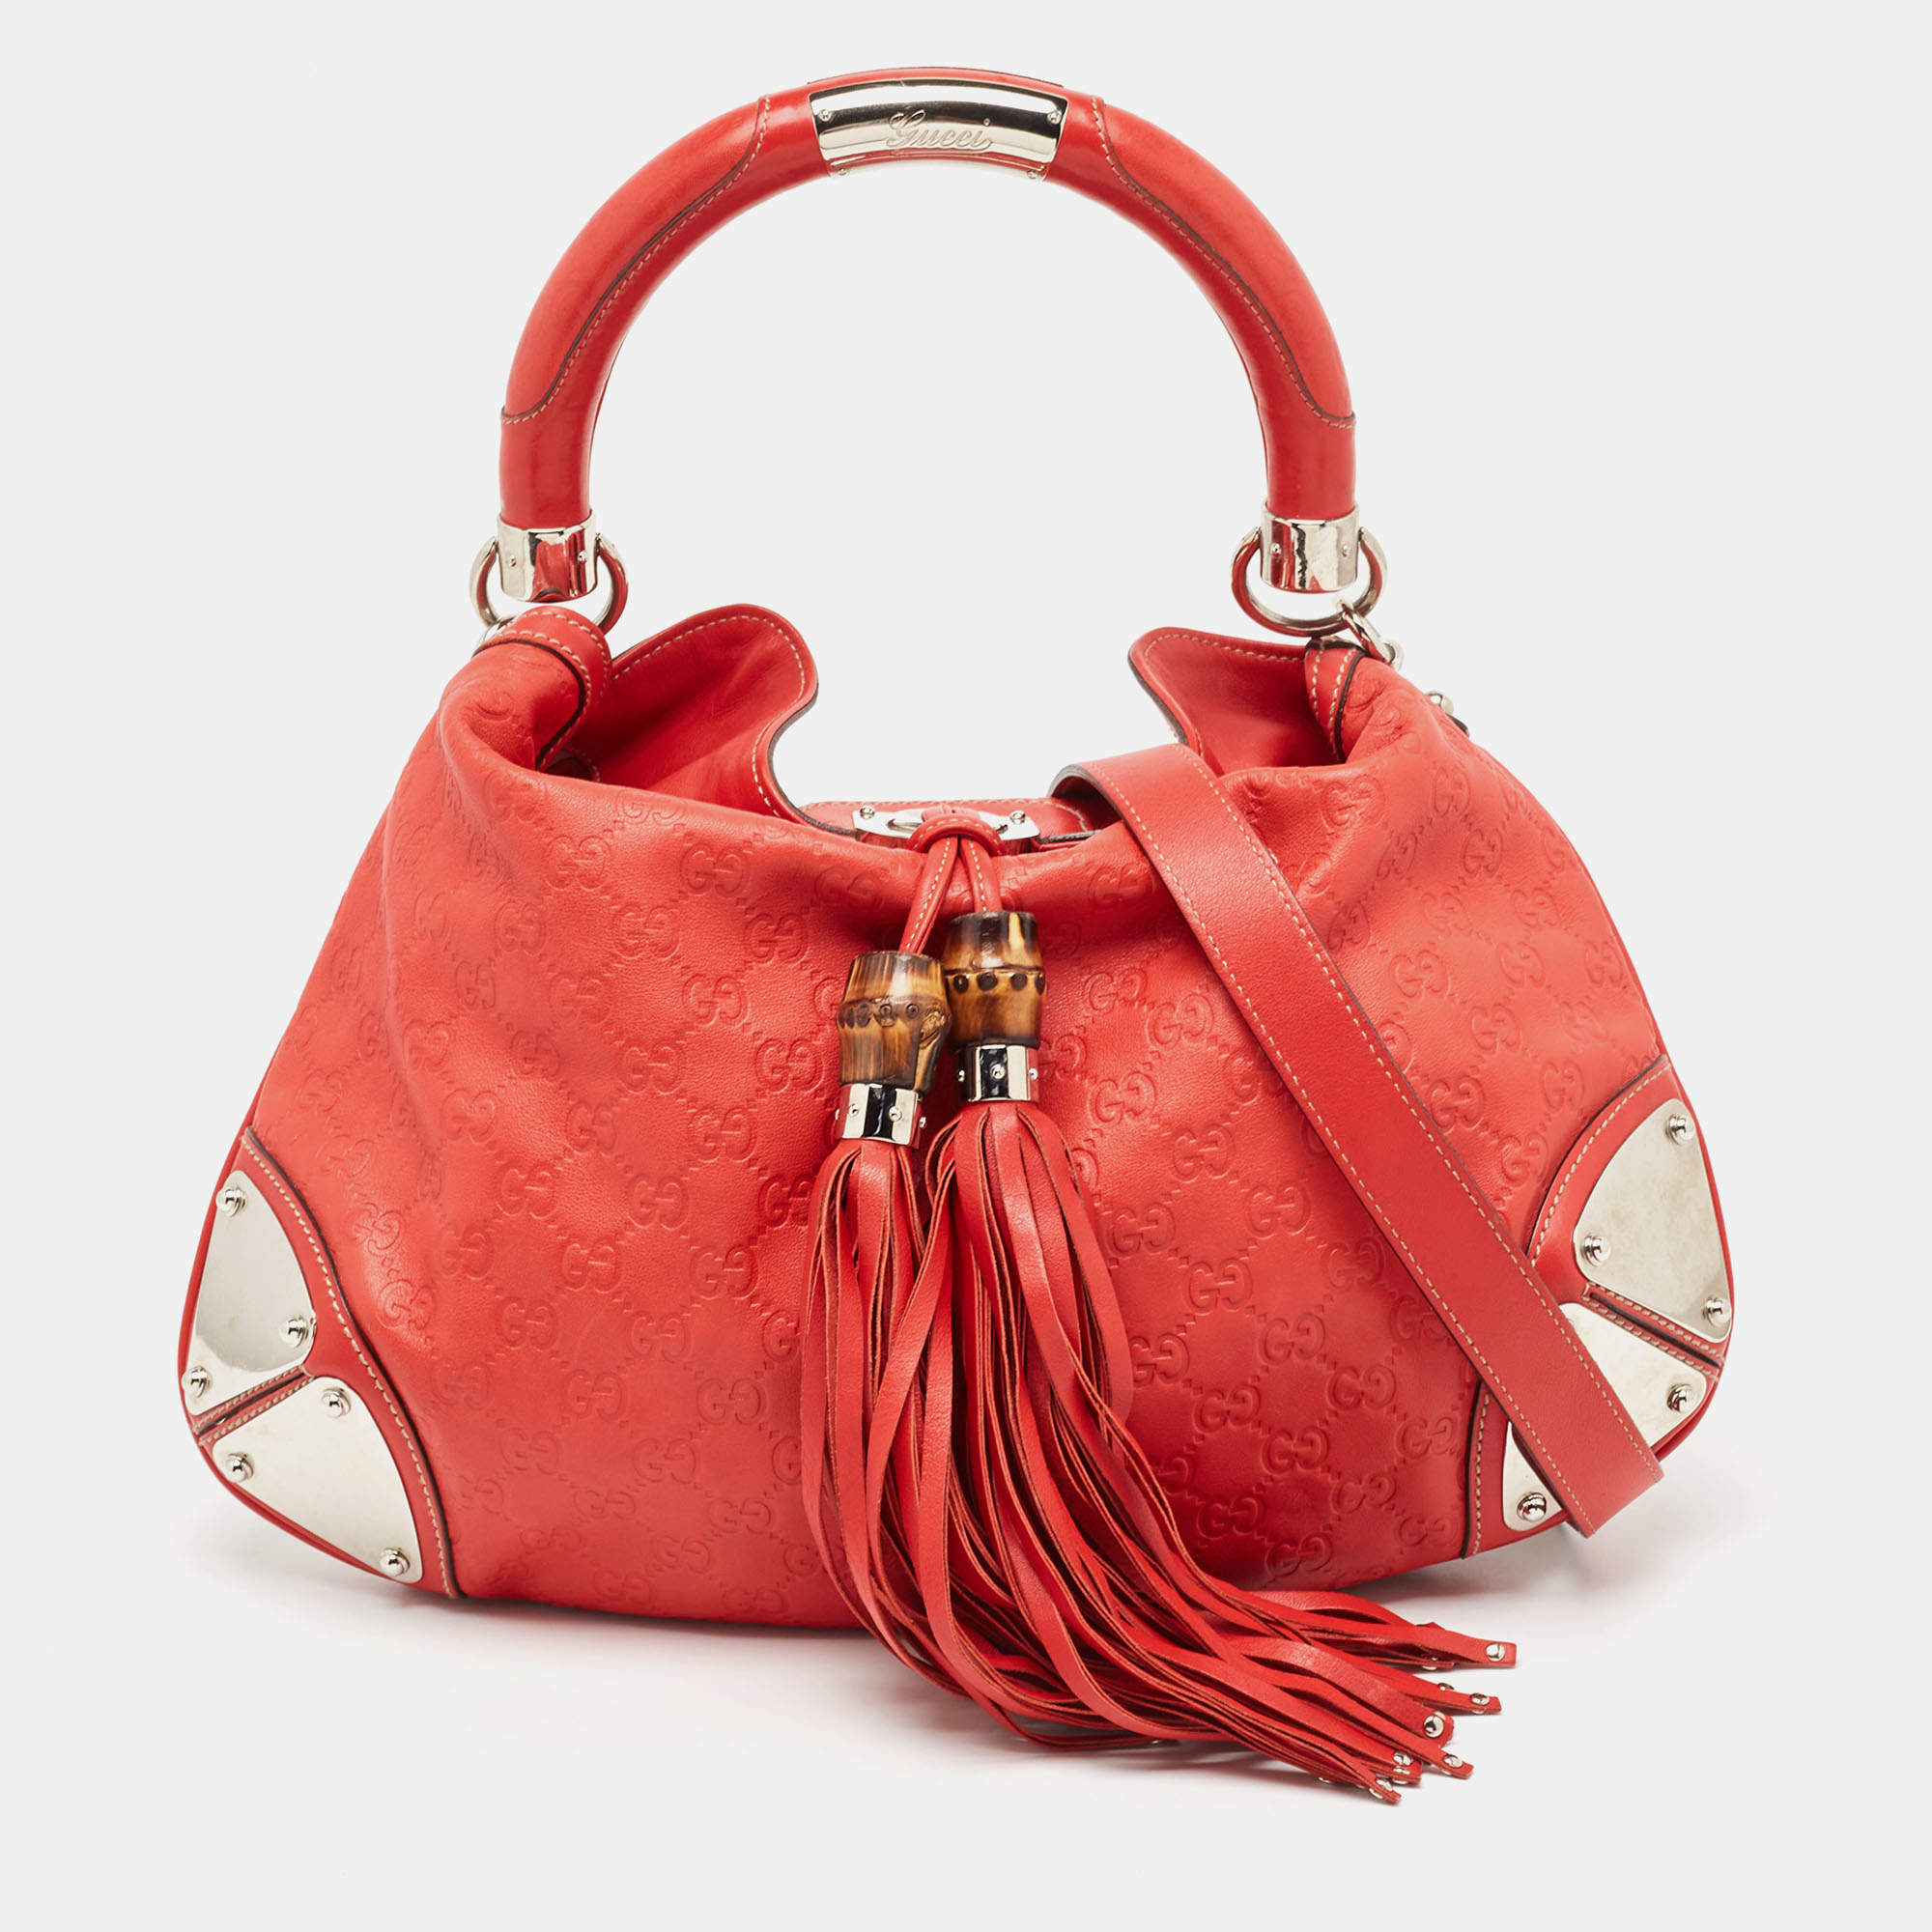 Gucci Red Guccissima Leather Medium Indy Hobo